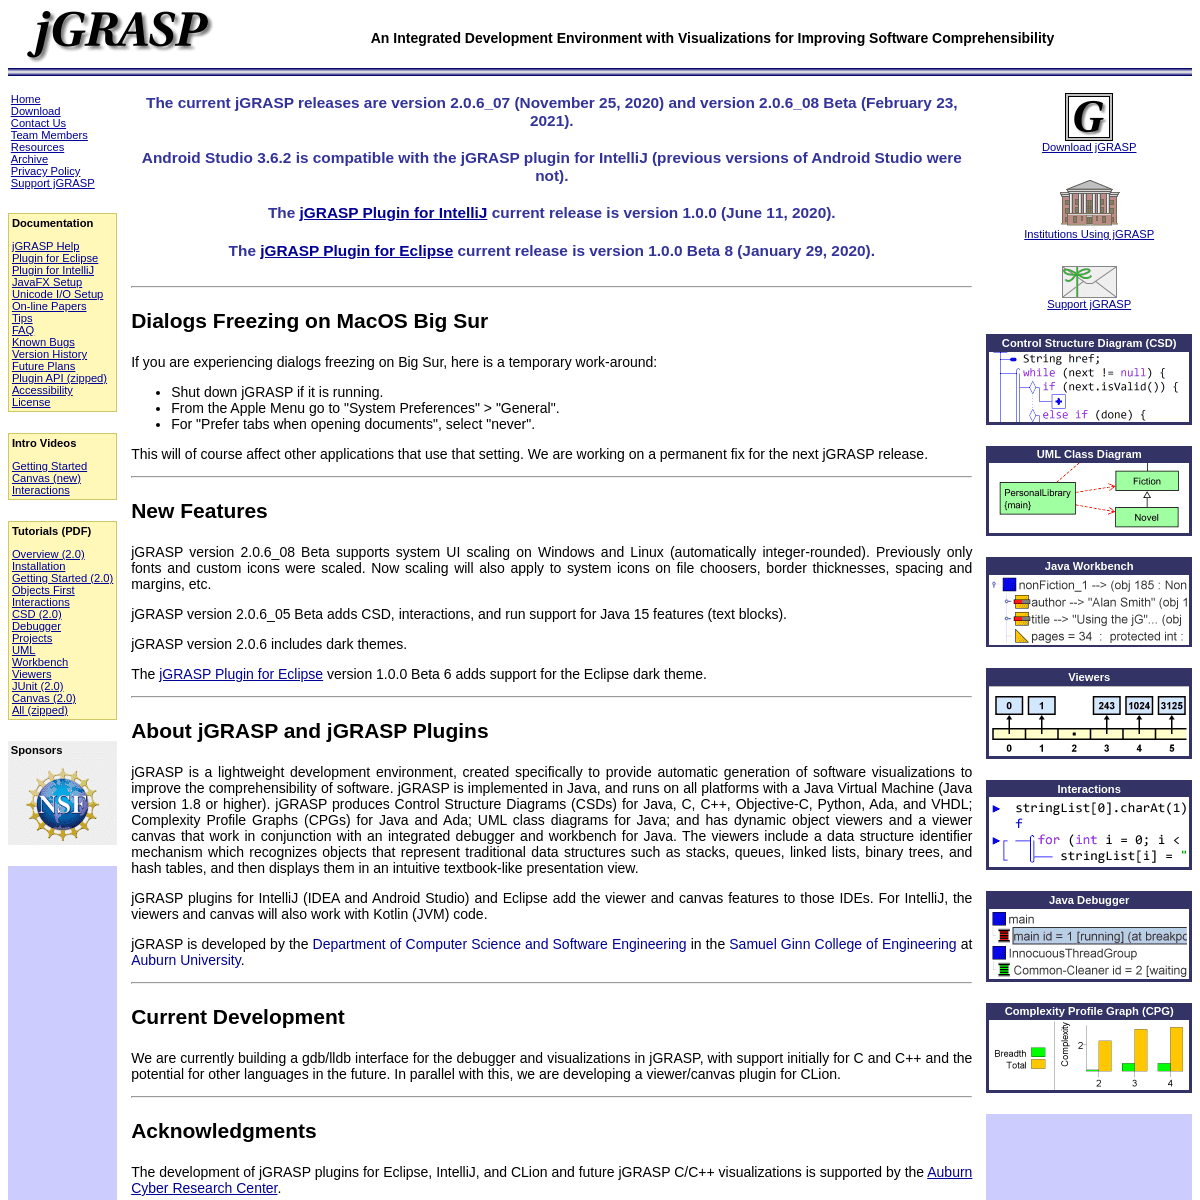 A complete backup of https://jgrasp.org